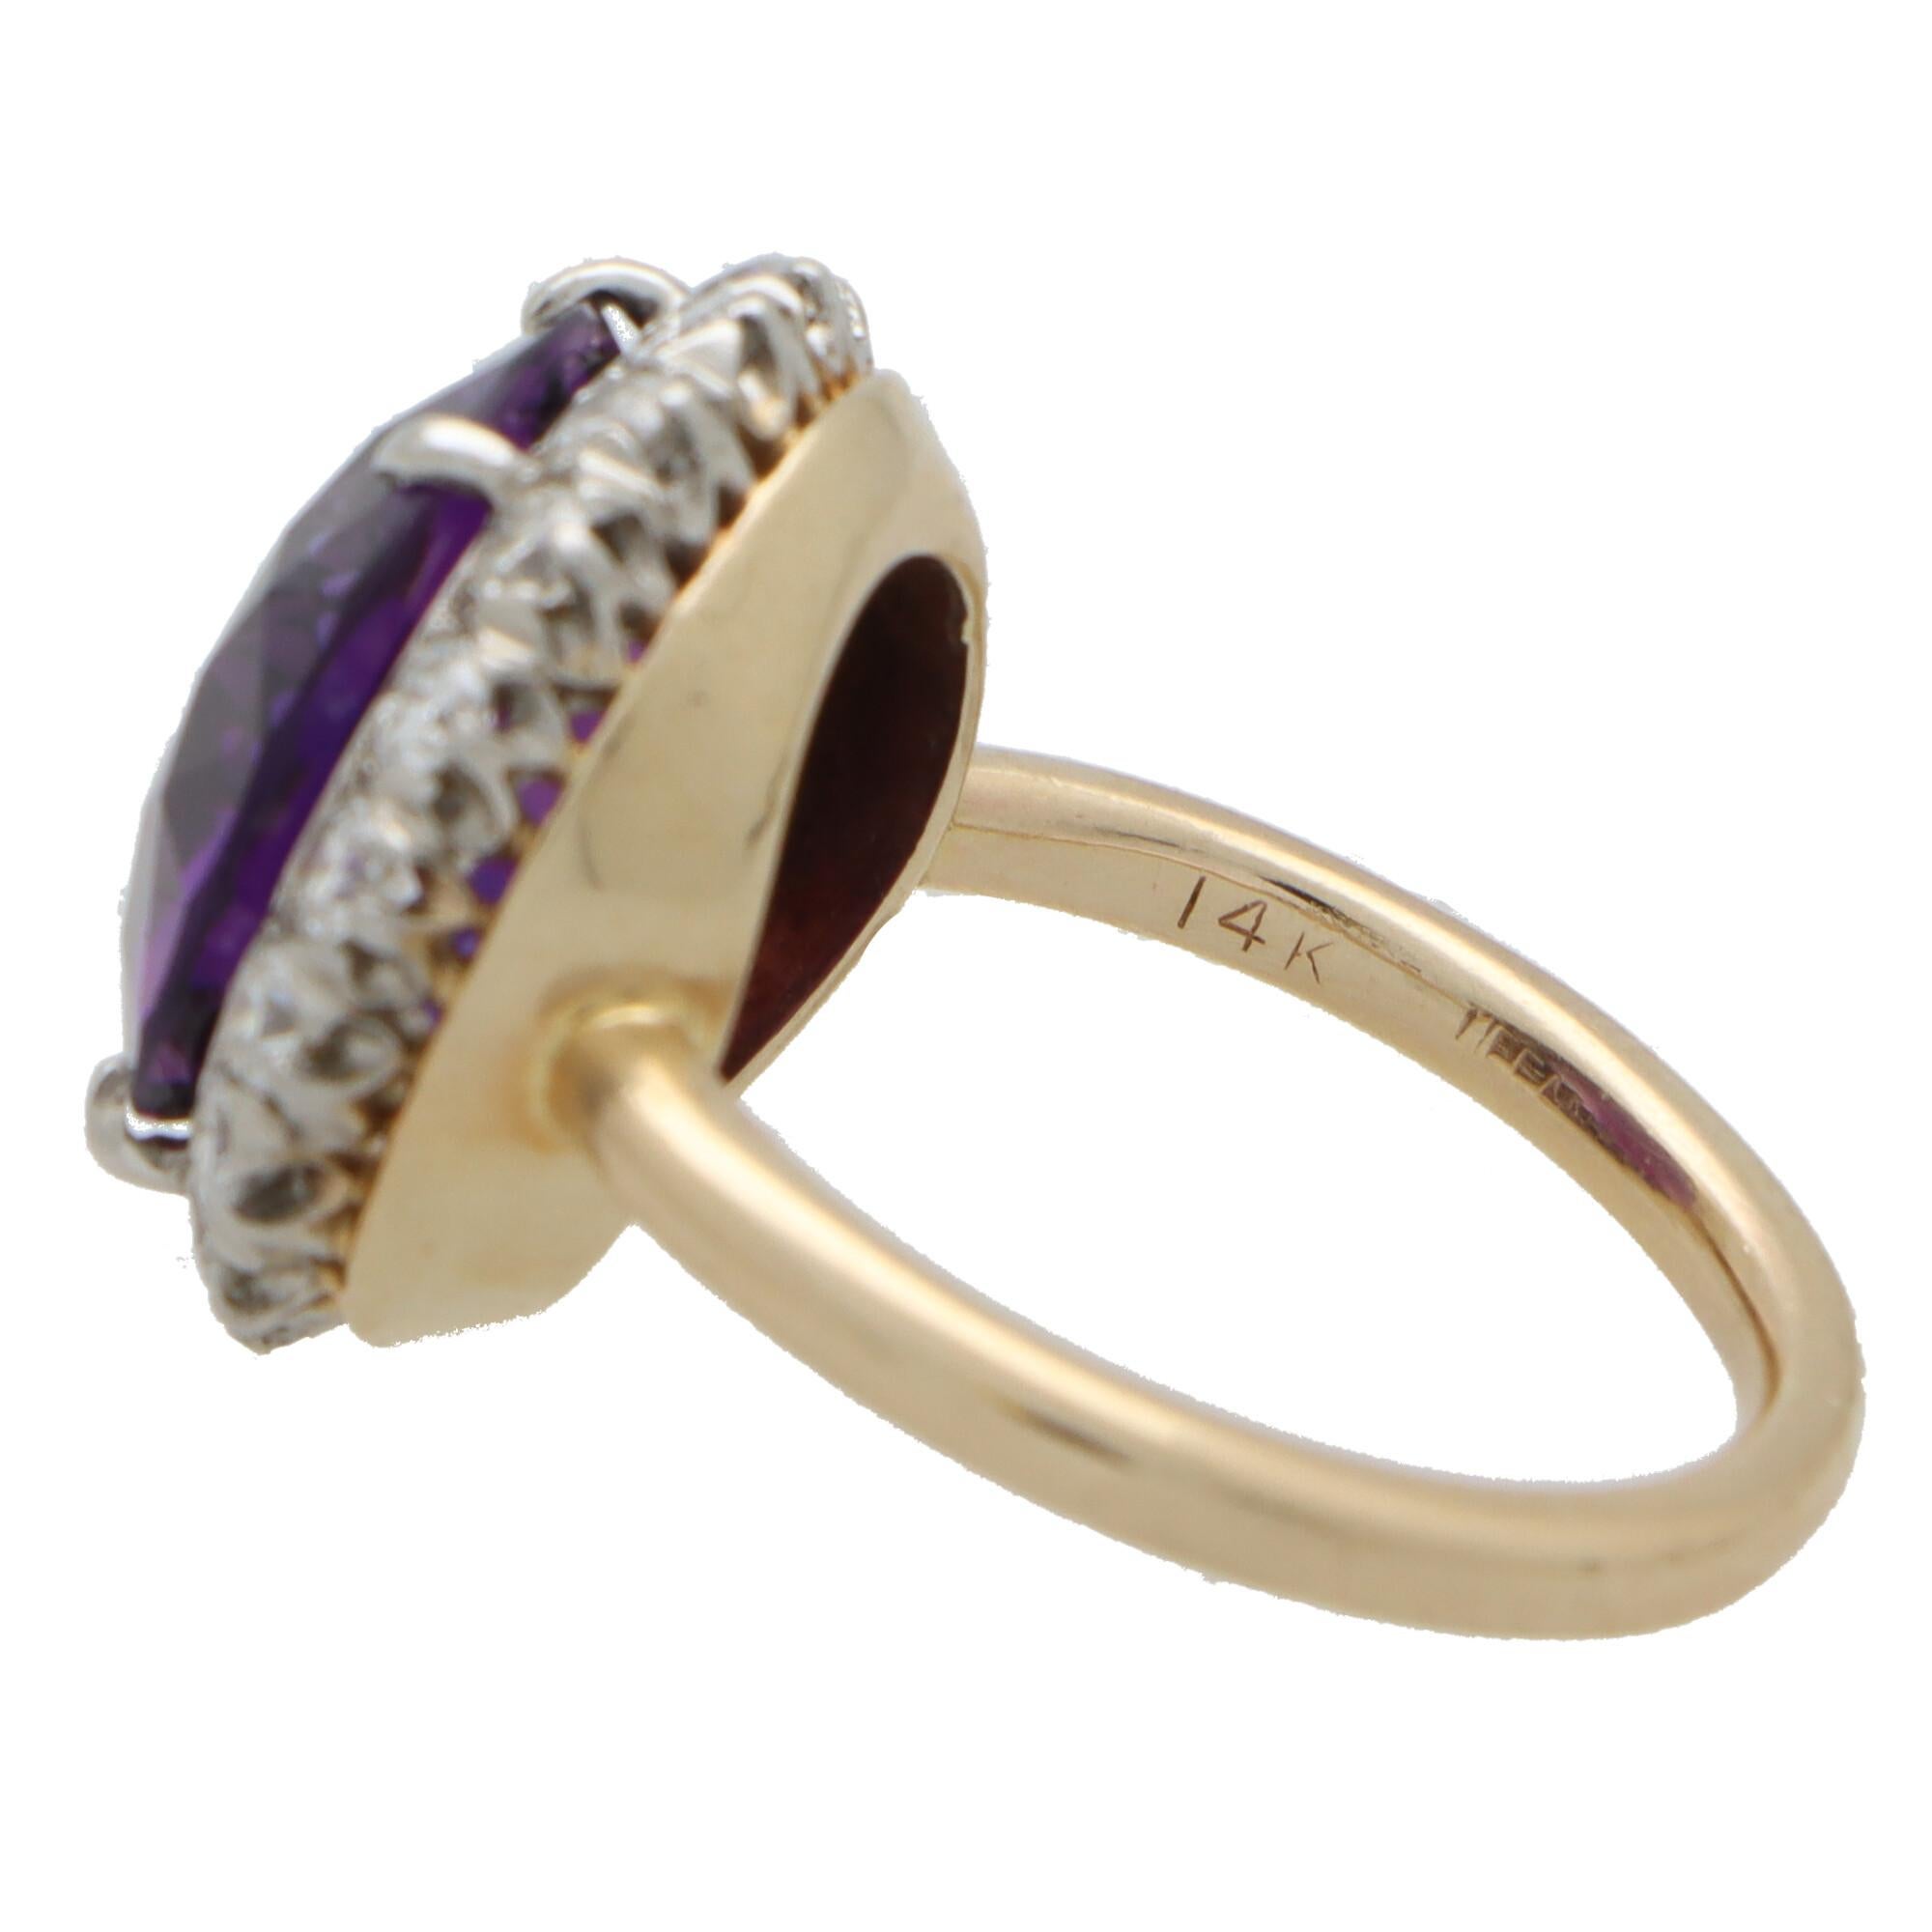 Women's or Men's Vintage Tiffany & Co. Amethyst and Diamond Cluster Ring Set in 14K Gold